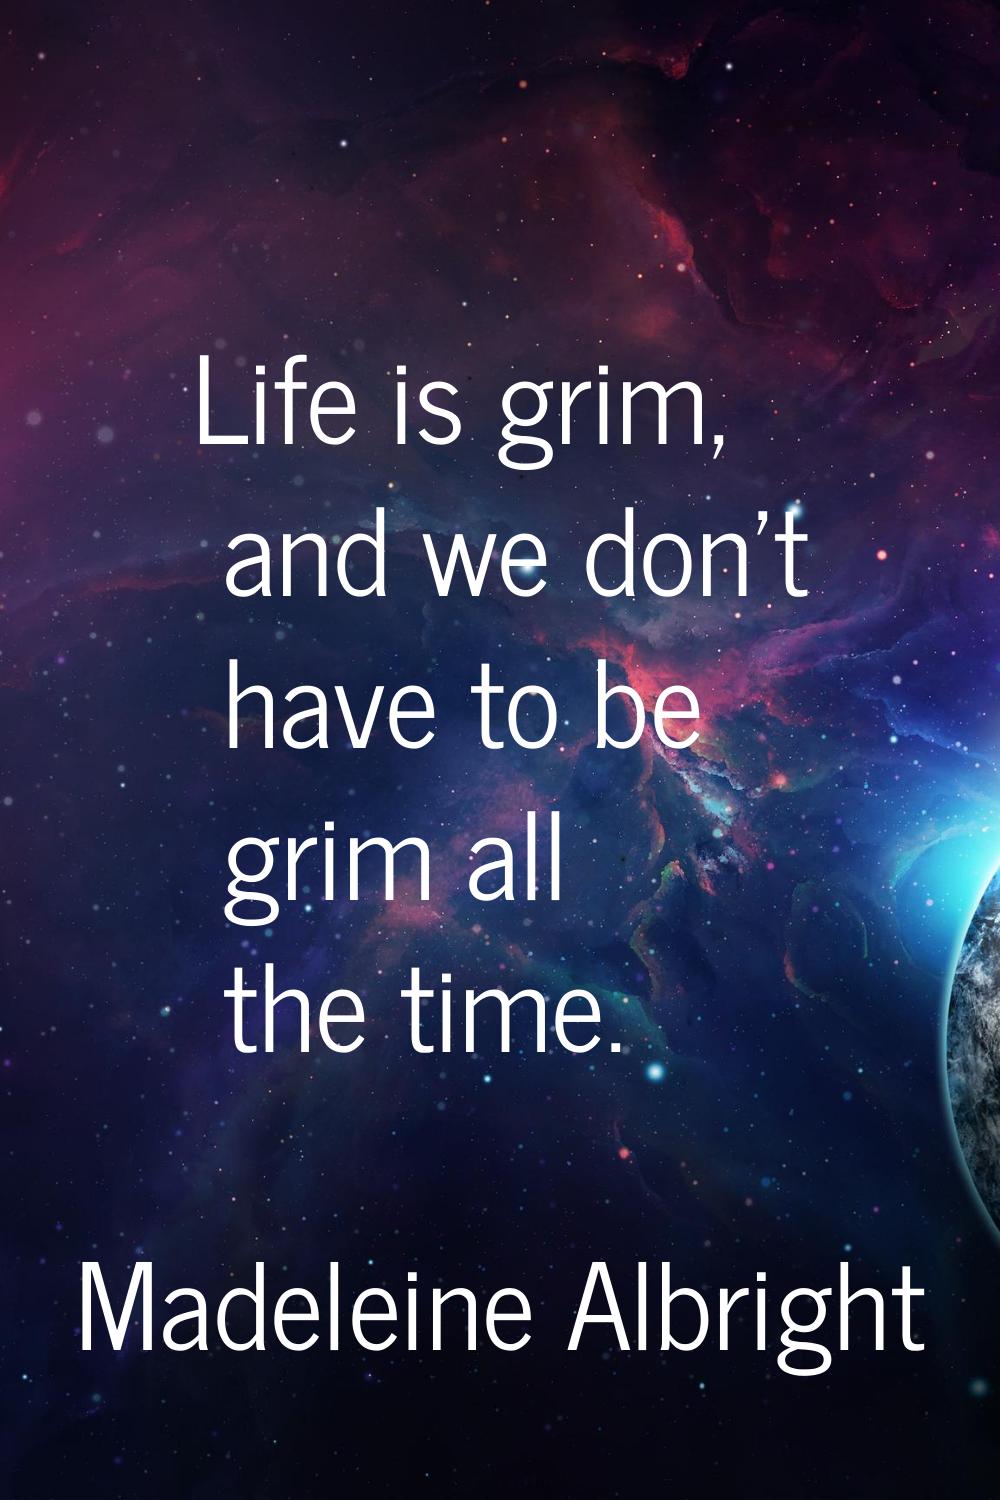 Life is grim, and we don't have to be grim all the time.